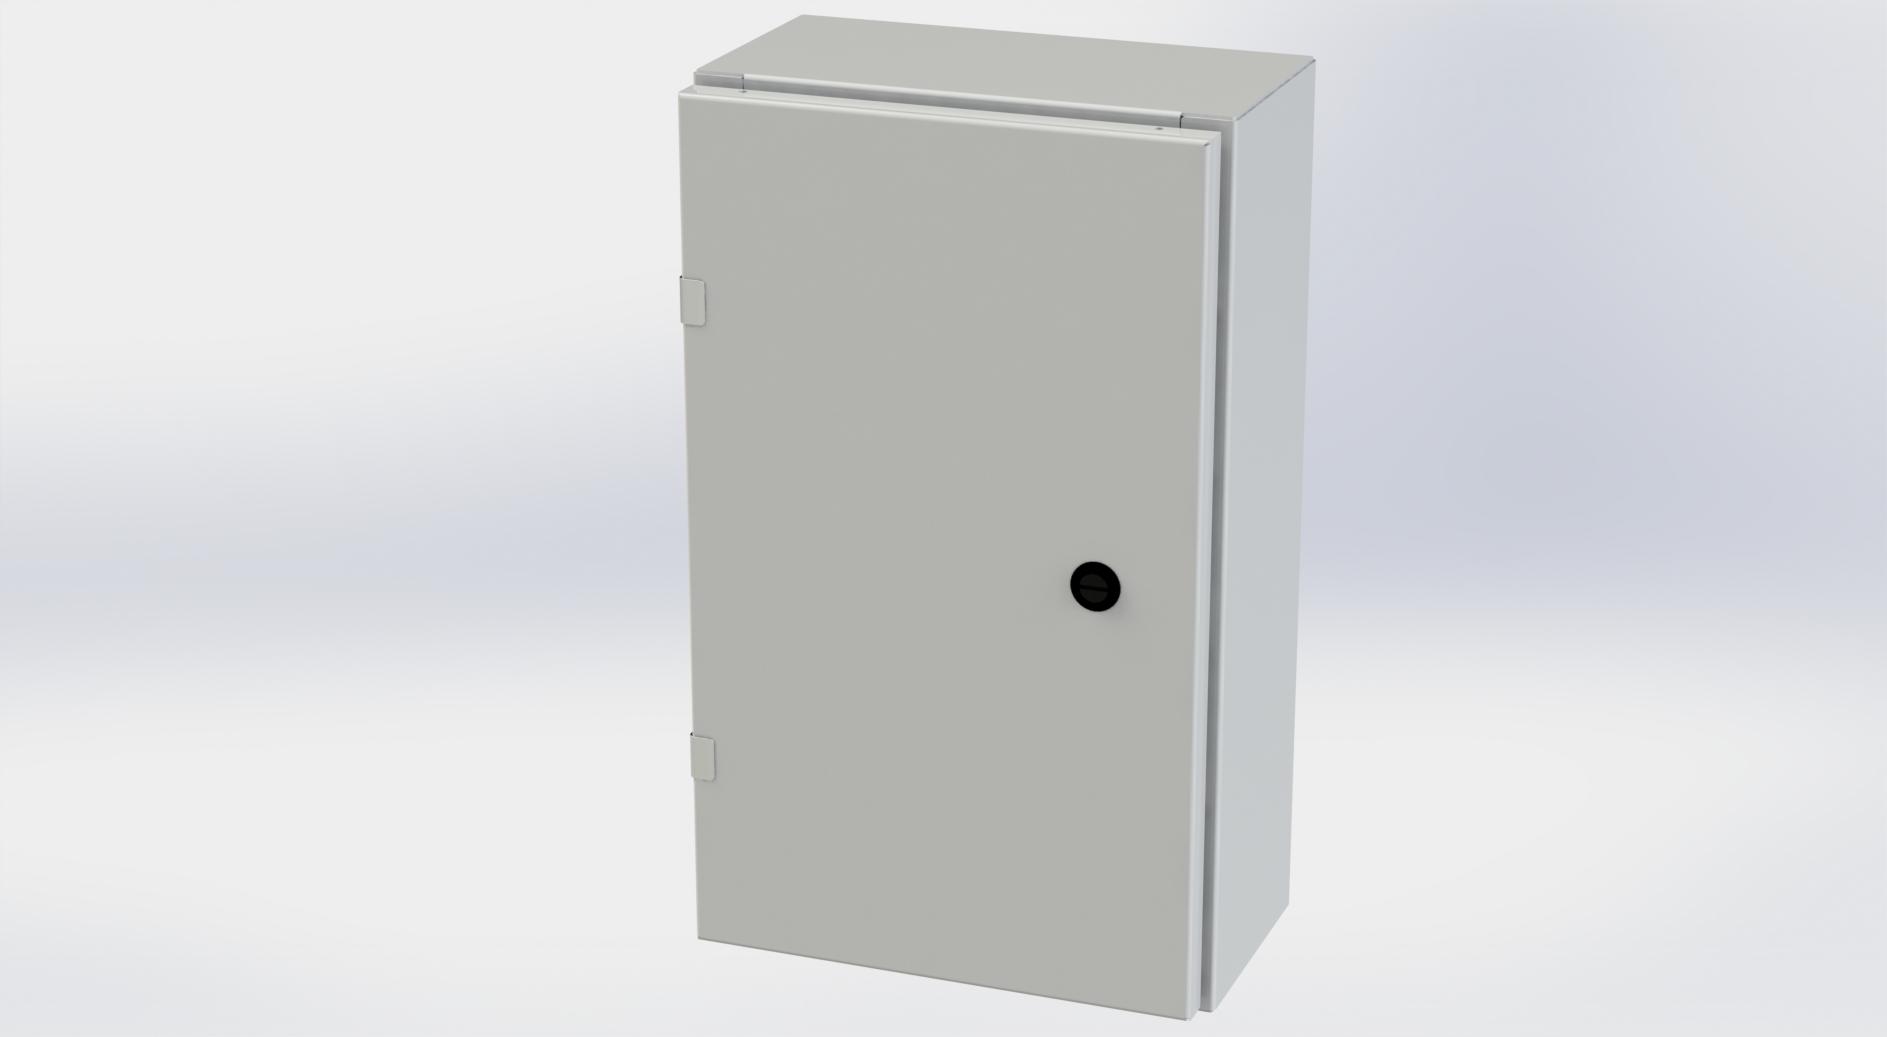 Saginaw Control SCE-20EL1206LPLG EL Enclosure, Height:20.00", Width:12.00", Depth:6.00", RAL 7035 gray powder coating inside and out. Optional sub-panels are powder coated white.